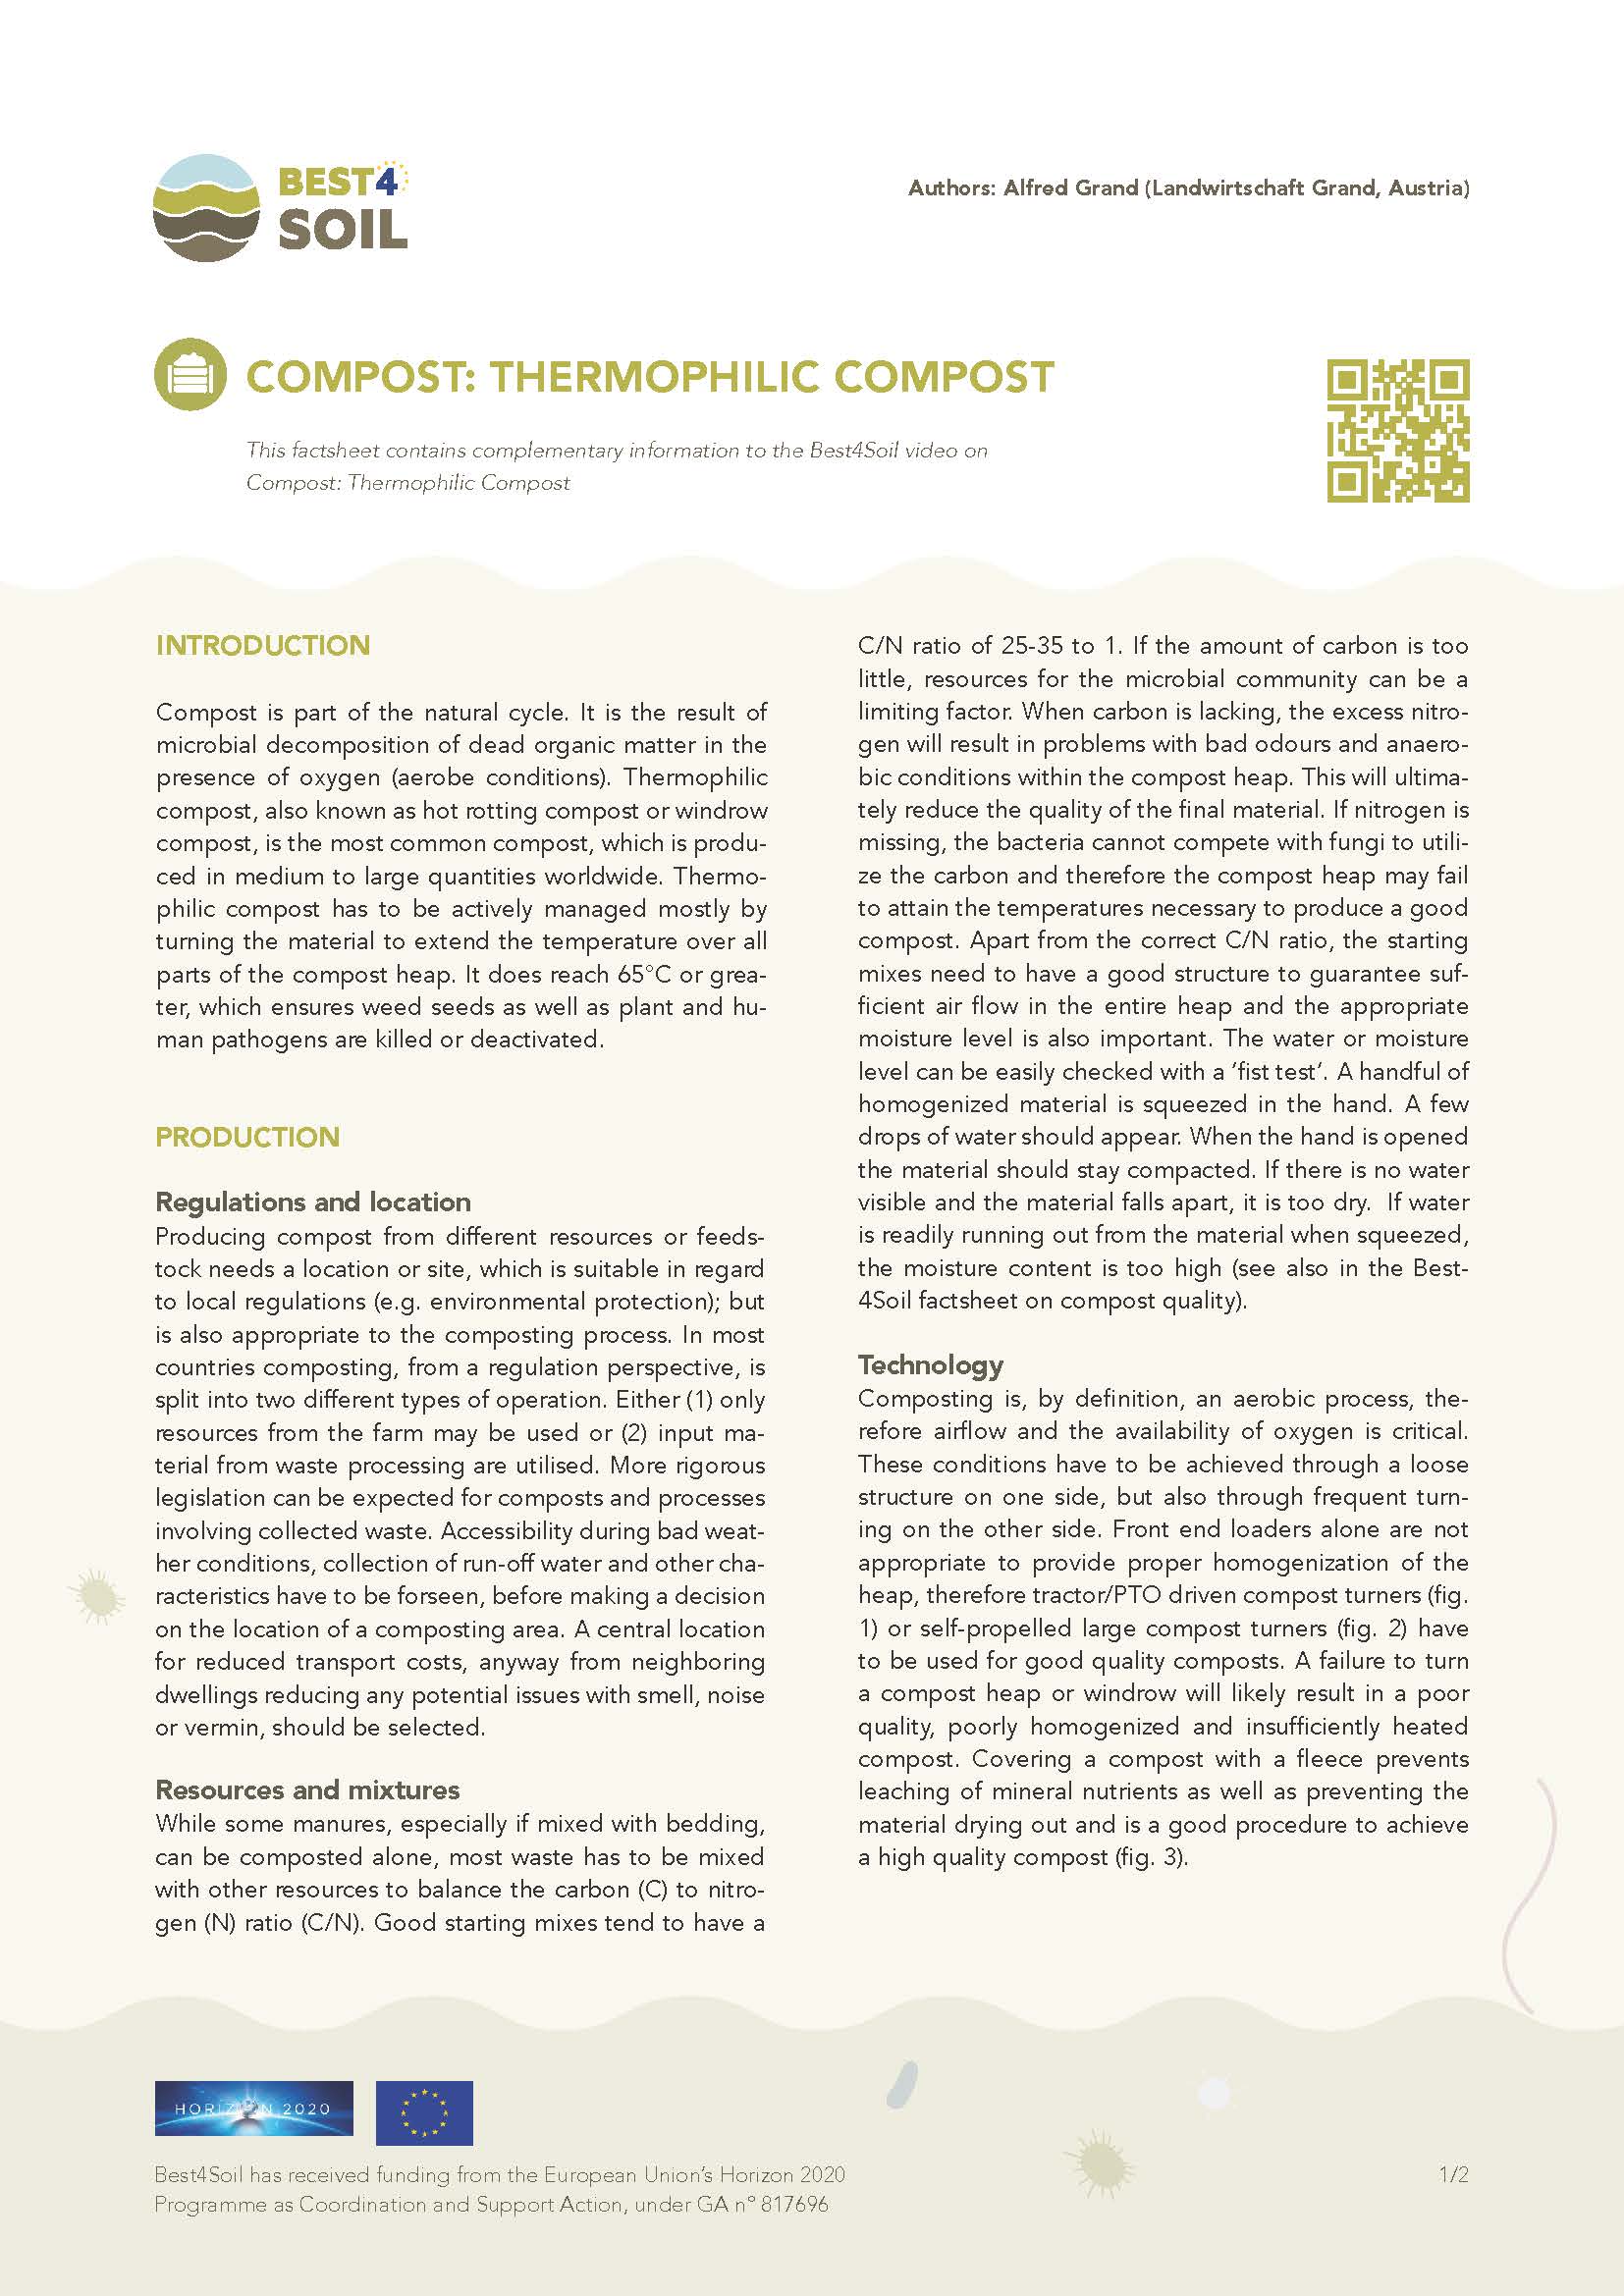 Compost: Thermophilic compost (Best4Soil Factsheet)